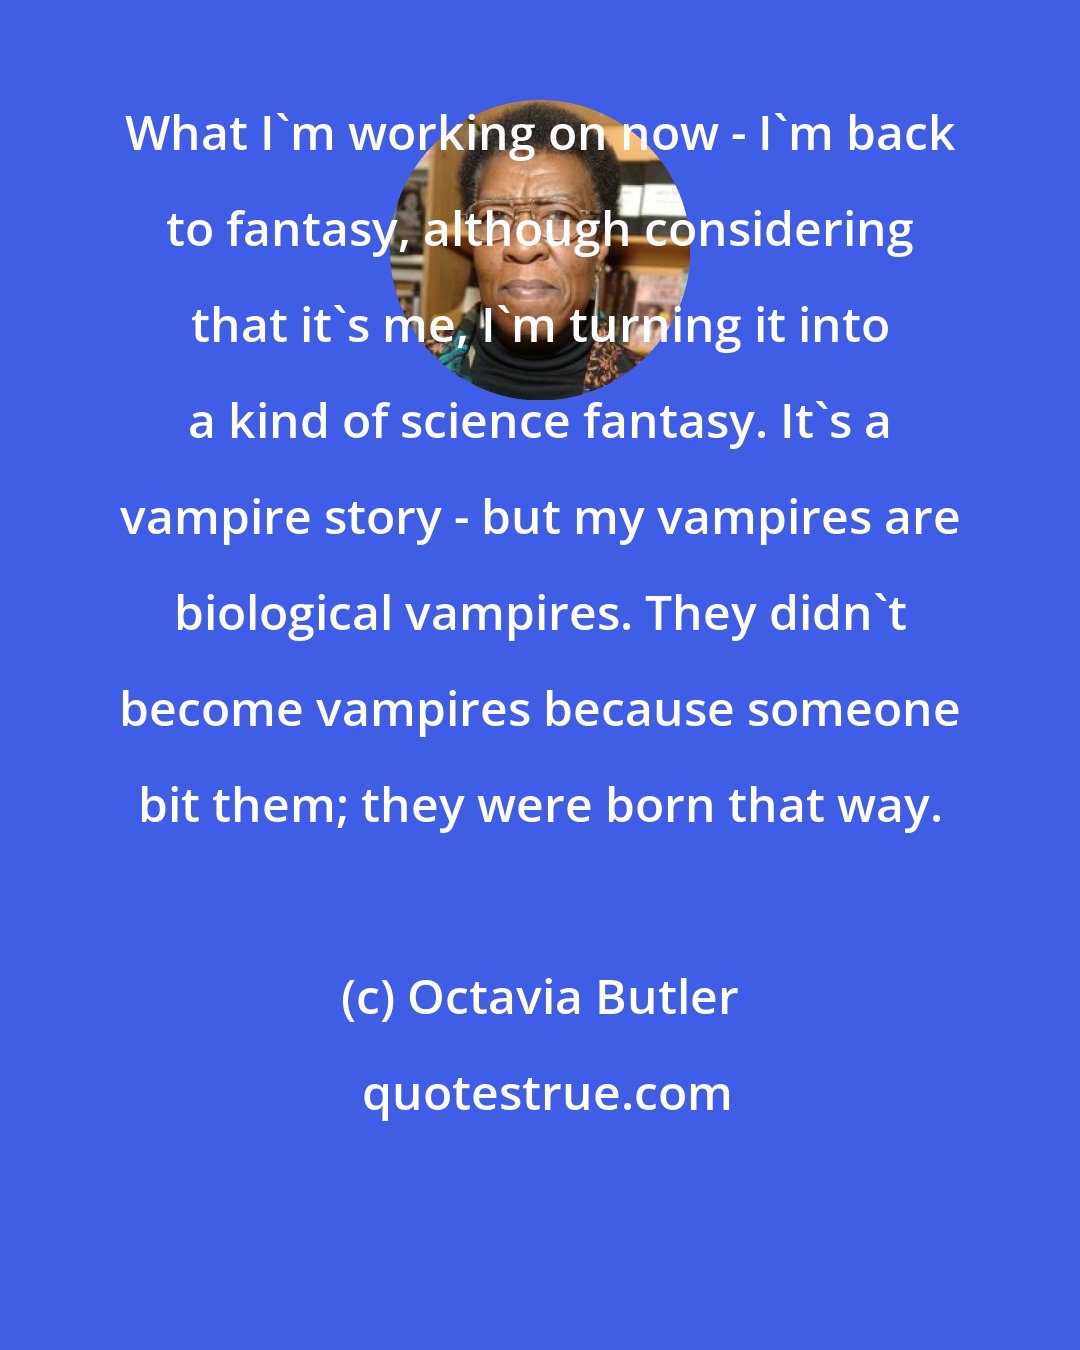 Octavia Butler: What I'm working on now - I'm back to fantasy, although considering that it's me, I'm turning it into a kind of science fantasy. It's a vampire story - but my vampires are biological vampires. They didn't become vampires because someone bit them; they were born that way.